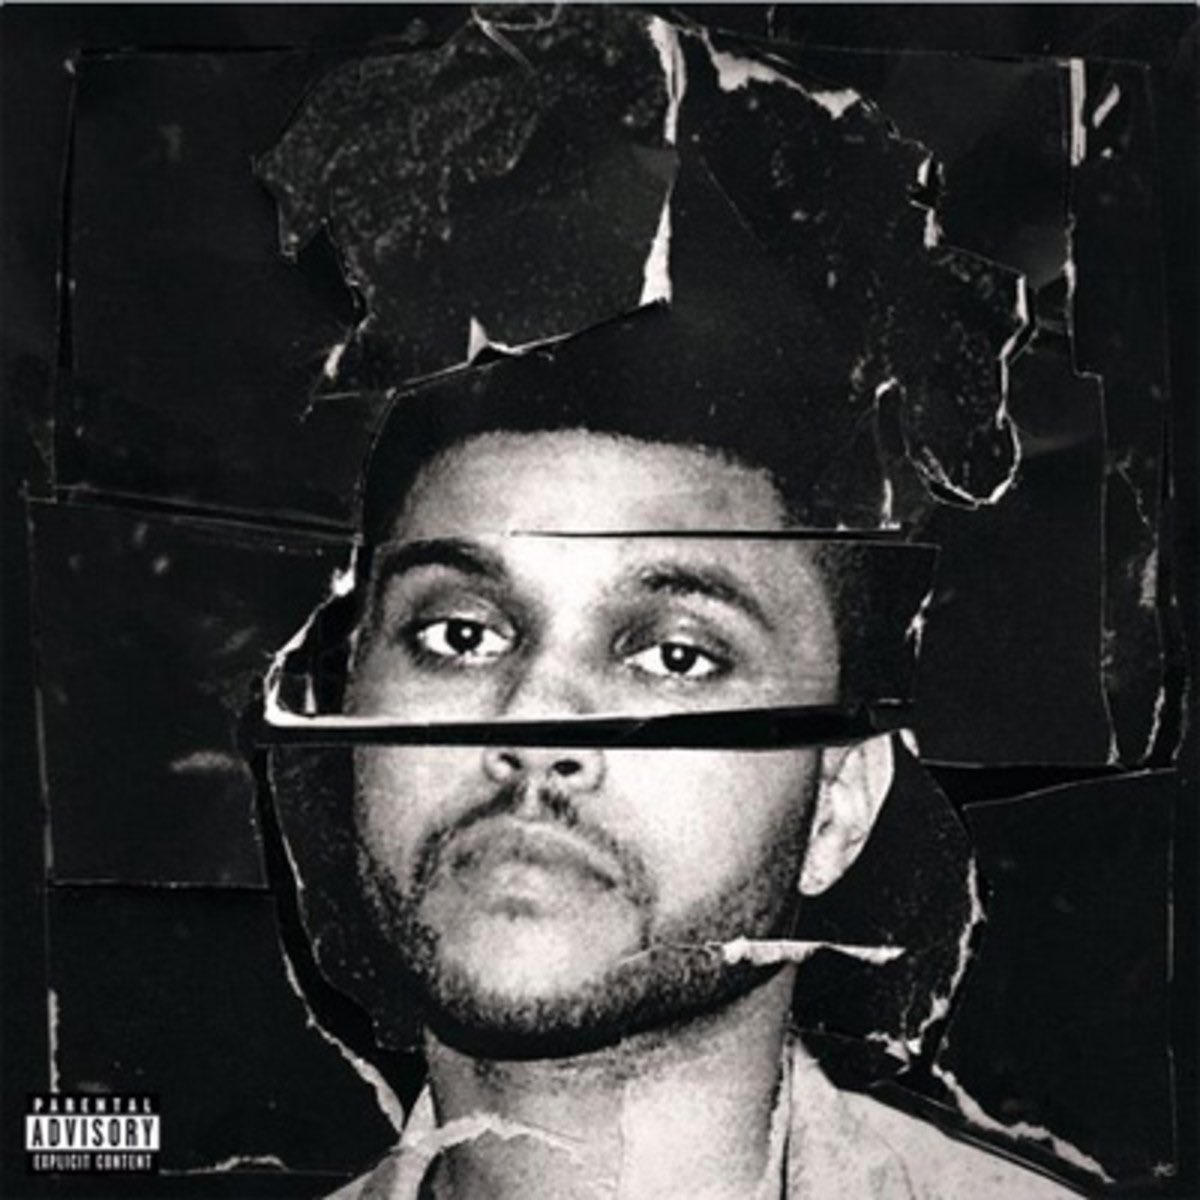 . @theweeknd “Beauty Behind The Madness” turns 5 here is a thread to celebrate Abel’s game-changing, iconic, and highly successful album.